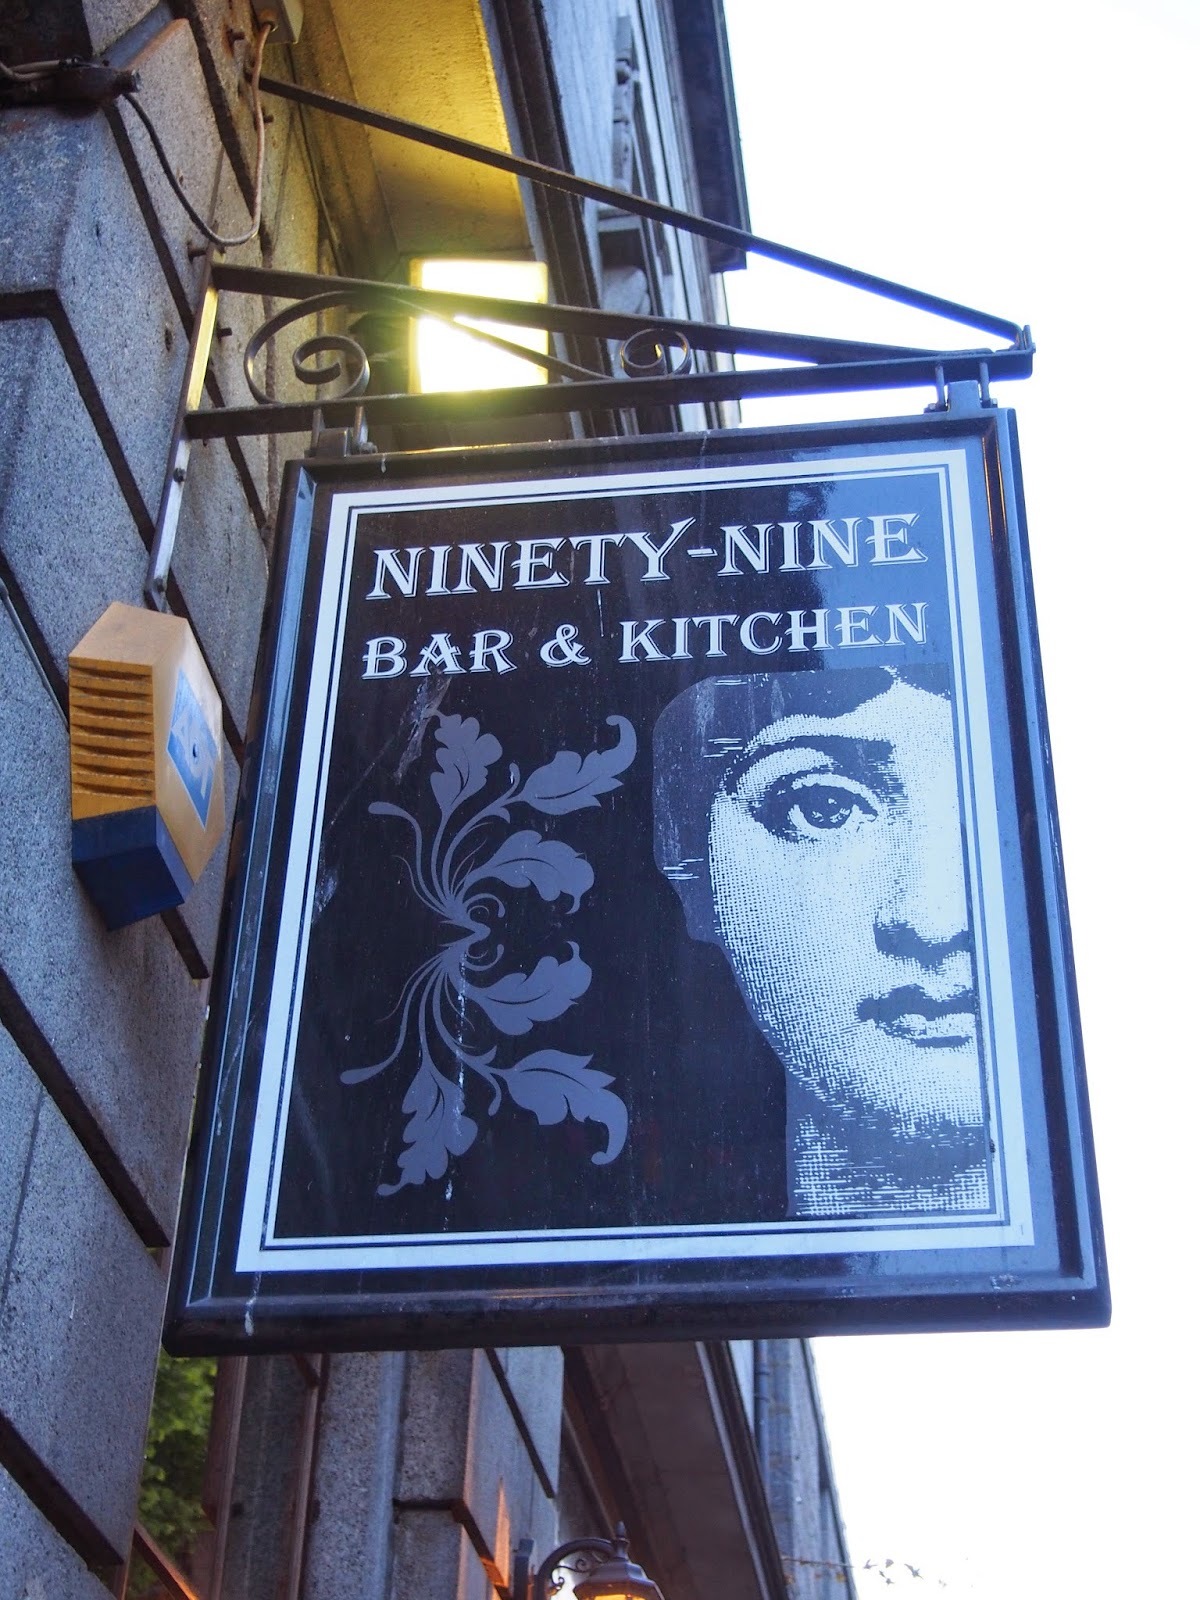 Ninety Nine Bar and Kitchen: Trendy doesn't even come close 